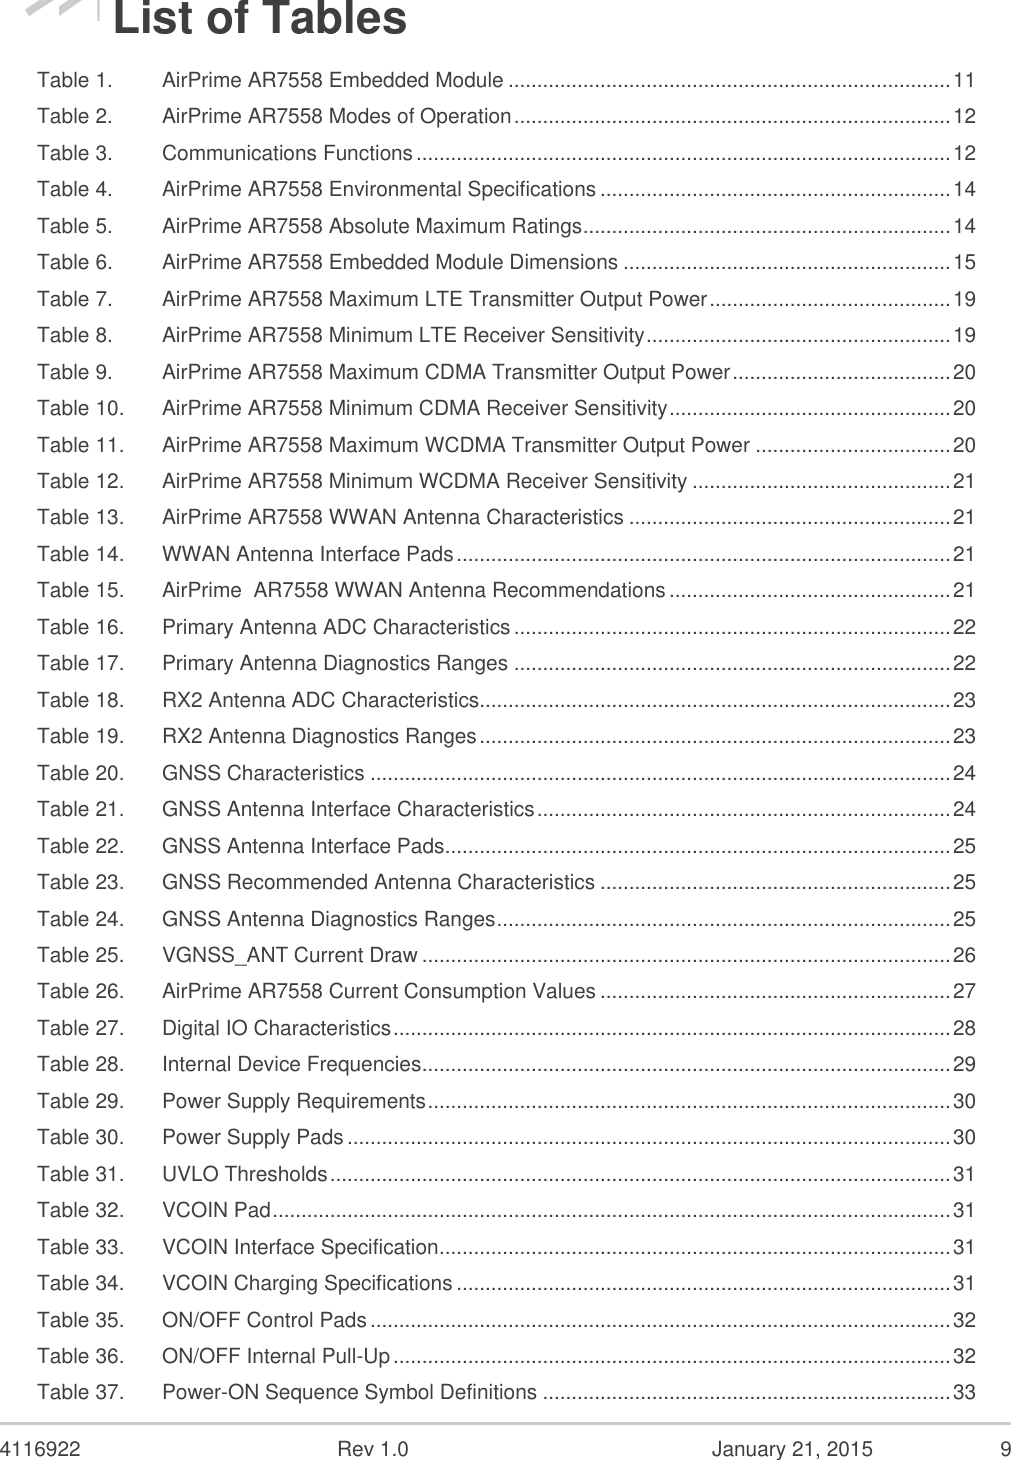  4116922  Rev 1.0  January 21, 2015  9 List of Tables Table 1. AirPrime AR7558 Embedded Module ............................................................................. 11 Table 2. AirPrime AR7558 Modes of Operation ............................................................................ 12 Table 3. Communications Functions ............................................................................................. 12 Table 4. AirPrime AR7558 Environmental Specifications ............................................................. 14 Table 5. AirPrime AR7558 Absolute Maximum Ratings ................................................................ 14 Table 6. AirPrime AR7558 Embedded Module Dimensions ......................................................... 15 Table 7. AirPrime AR7558 Maximum LTE Transmitter Output Power .......................................... 19 Table 8. AirPrime AR7558 Minimum LTE Receiver Sensitivity ..................................................... 19 Table 9. AirPrime AR7558 Maximum CDMA Transmitter Output Power ...................................... 20 Table 10. AirPrime AR7558 Minimum CDMA Receiver Sensitivity ................................................. 20 Table 11. AirPrime AR7558 Maximum WCDMA Transmitter Output Power .................................. 20 Table 12. AirPrime AR7558 Minimum WCDMA Receiver Sensitivity ............................................. 21 Table 13. AirPrime AR7558 WWAN Antenna Characteristics ........................................................ 21 Table 14. WWAN Antenna Interface Pads ...................................................................................... 21 Table 15. AirPrime  AR7558 WWAN Antenna Recommendations ................................................. 21 Table 16. Primary Antenna ADC Characteristics ............................................................................ 22 Table 17. Primary Antenna Diagnostics Ranges ............................................................................ 22 Table 18. RX2 Antenna ADC Characteristics.................................................................................. 23 Table 19. RX2 Antenna Diagnostics Ranges .................................................................................. 23 Table 20. GNSS Characteristics ..................................................................................................... 24 Table 21. GNSS Antenna Interface Characteristics ........................................................................ 24 Table 22. GNSS Antenna Interface Pads ........................................................................................ 25 Table 23. GNSS Recommended Antenna Characteristics ............................................................. 25 Table 24. GNSS Antenna Diagnostics Ranges ............................................................................... 25 Table 25. VGNSS_ANT Current Draw ............................................................................................ 26 Table 26. AirPrime AR7558 Current Consumption Values ............................................................. 27 Table 27. Digital IO Characteristics ................................................................................................. 28 Table 28. Internal Device Frequencies ............................................................................................ 29 Table 29. Power Supply Requirements ........................................................................................... 30 Table 30. Power Supply Pads ......................................................................................................... 30 Table 31. UVLO Thresholds ............................................................................................................ 31 Table 32. VCOIN Pad ...................................................................................................................... 31 Table 33. VCOIN Interface Specification ......................................................................................... 31 Table 34. VCOIN Charging Specifications ...................................................................................... 31 Table 35. ON/OFF Control Pads ..................................................................................................... 32 Table 36. ON/OFF Internal Pull-Up ................................................................................................. 32 Table 37. Power-ON Sequence Symbol Definitions ....................................................................... 33 